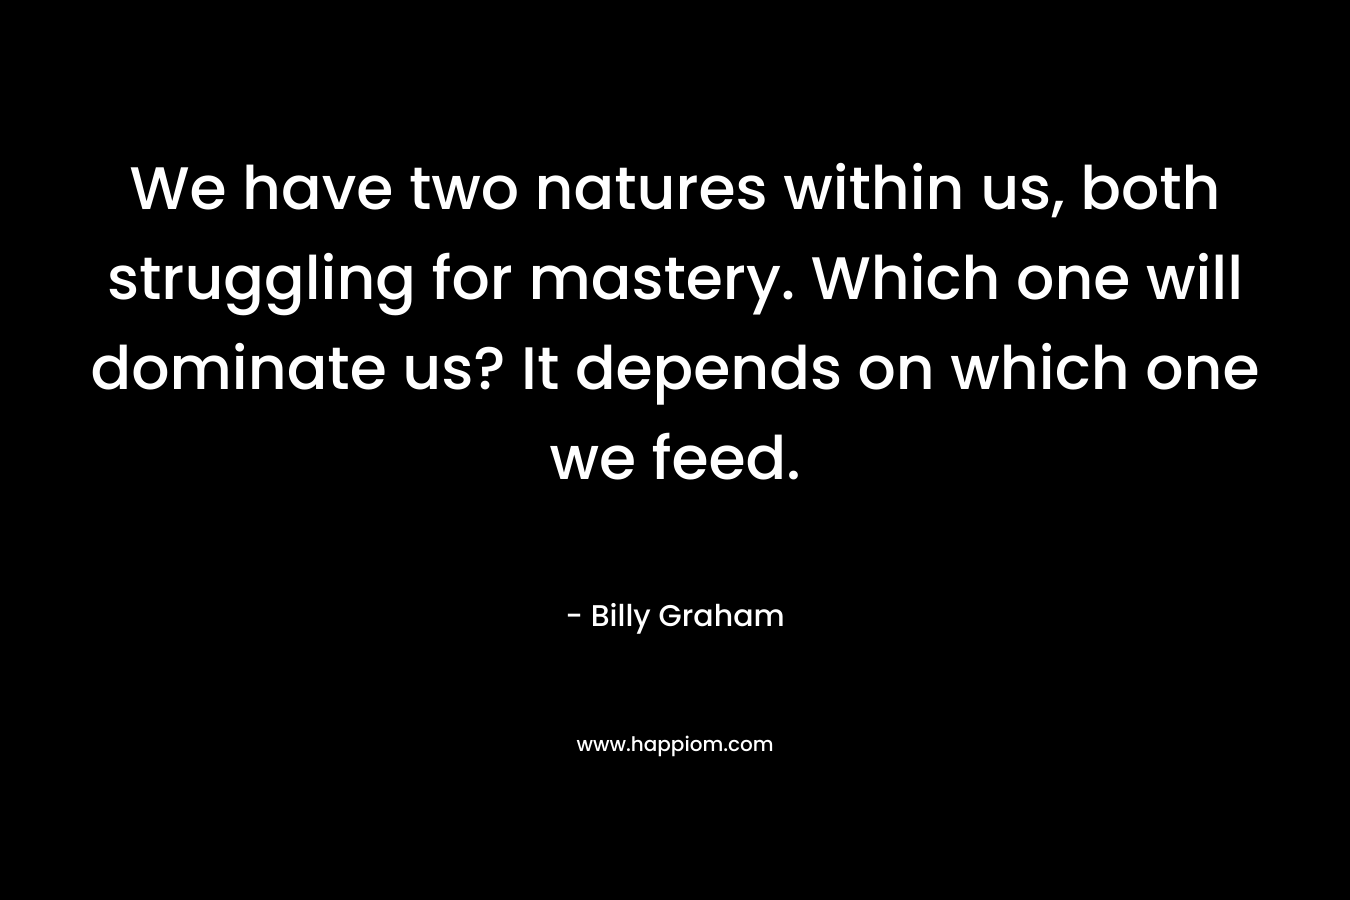 We have two natures within us, both struggling for mastery. Which one will dominate us? It depends on which one we feed.